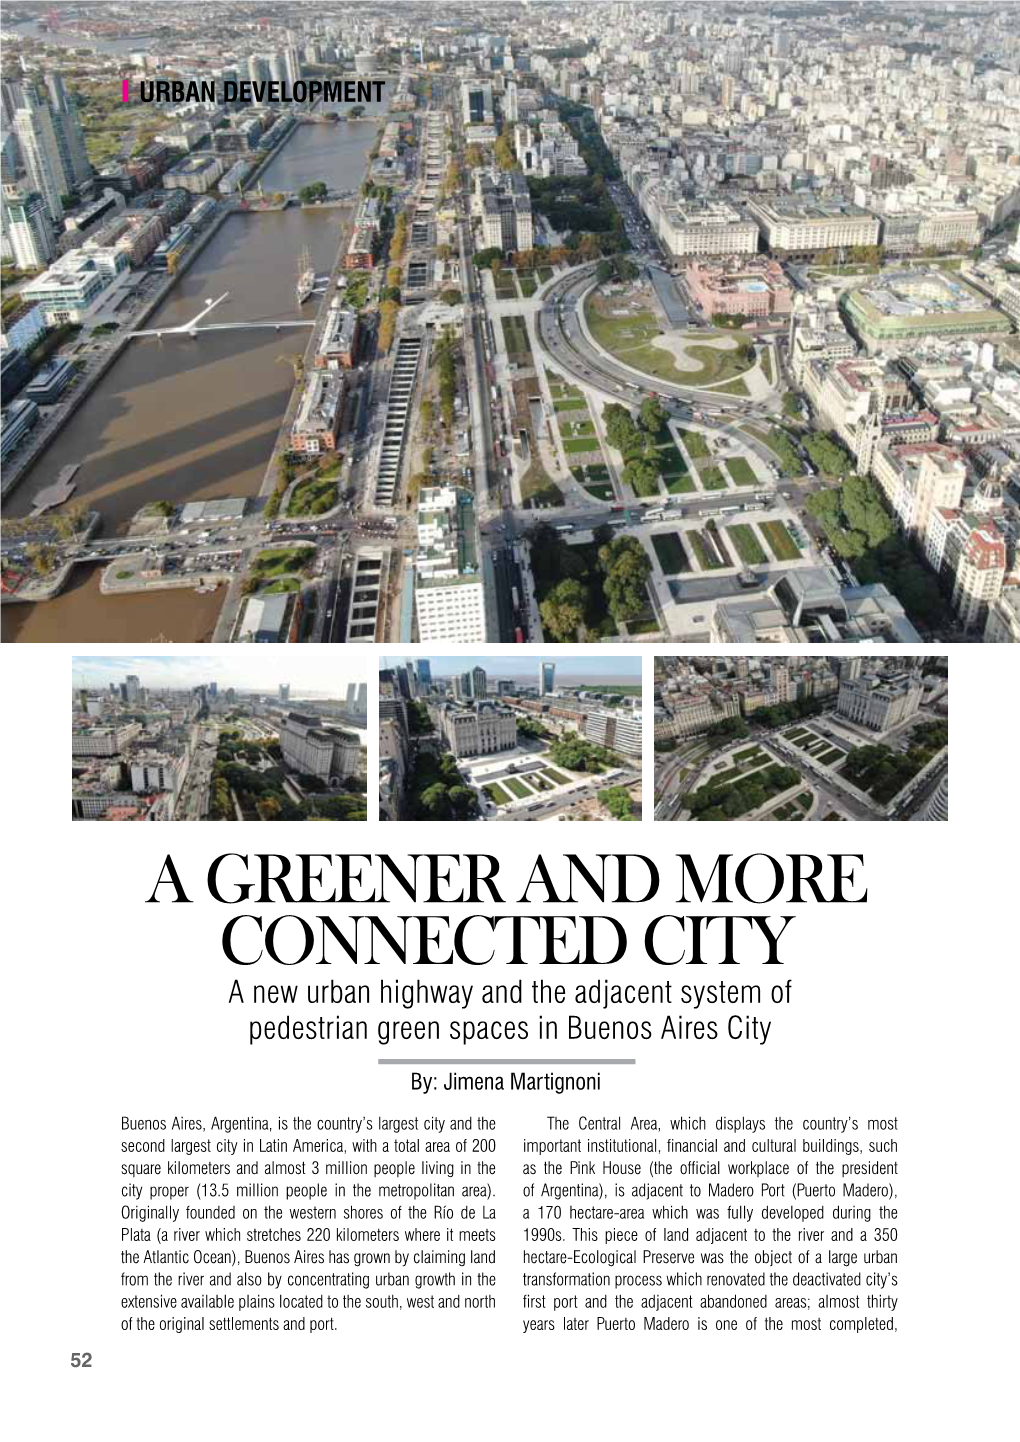 A Greener and More Connected City a New Urban Highway and the Adjacent System of Pedestrian Green Spaces in Buenos Aires City